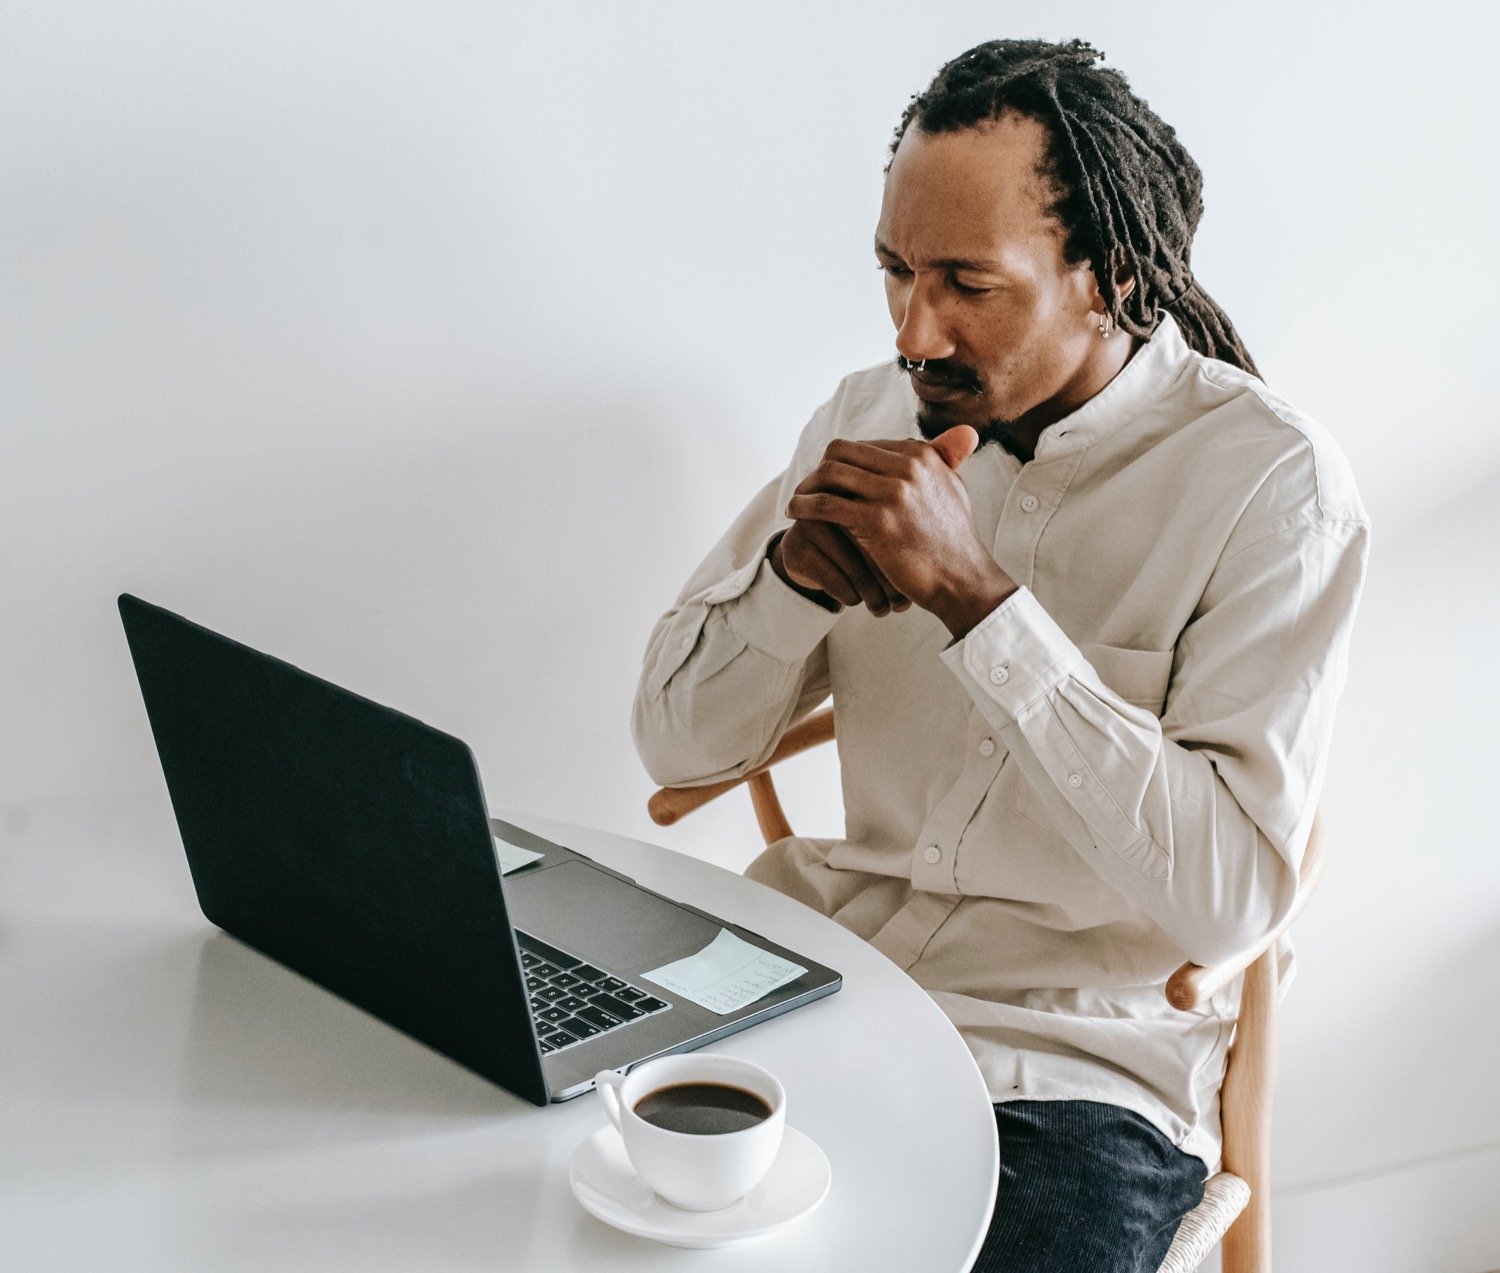 African American man staring at online grief article